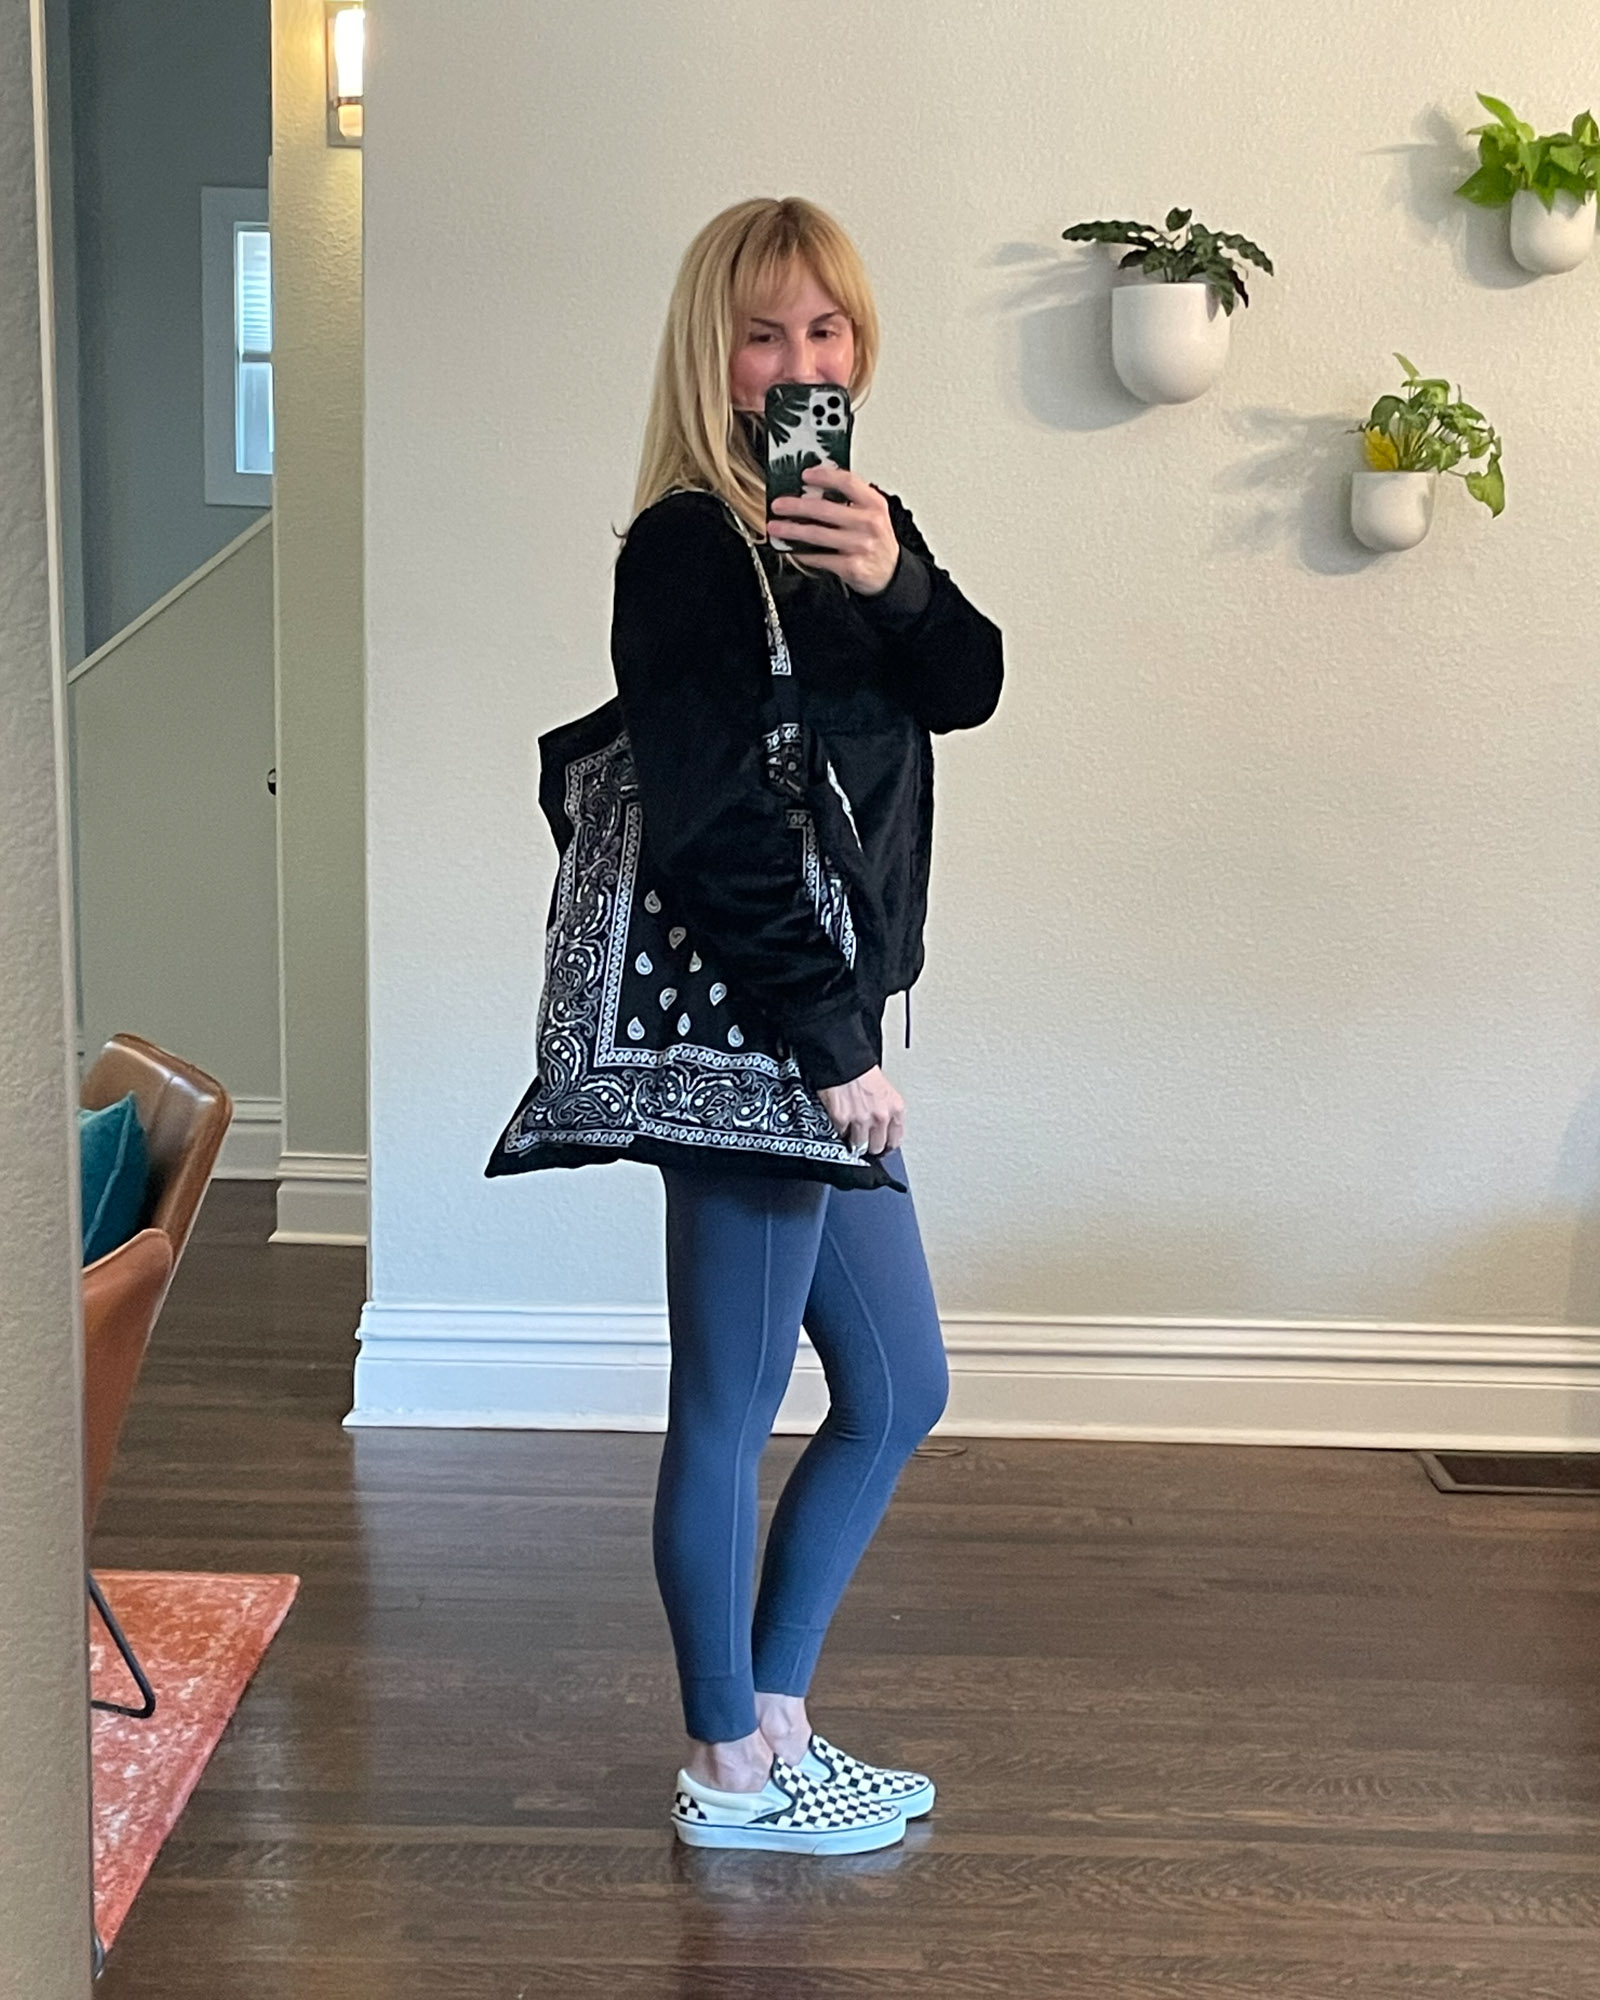 Wearing the North Face Osito fleece in black from the Nordstrom Anniversary sale with leggings and vans checked sneakers.